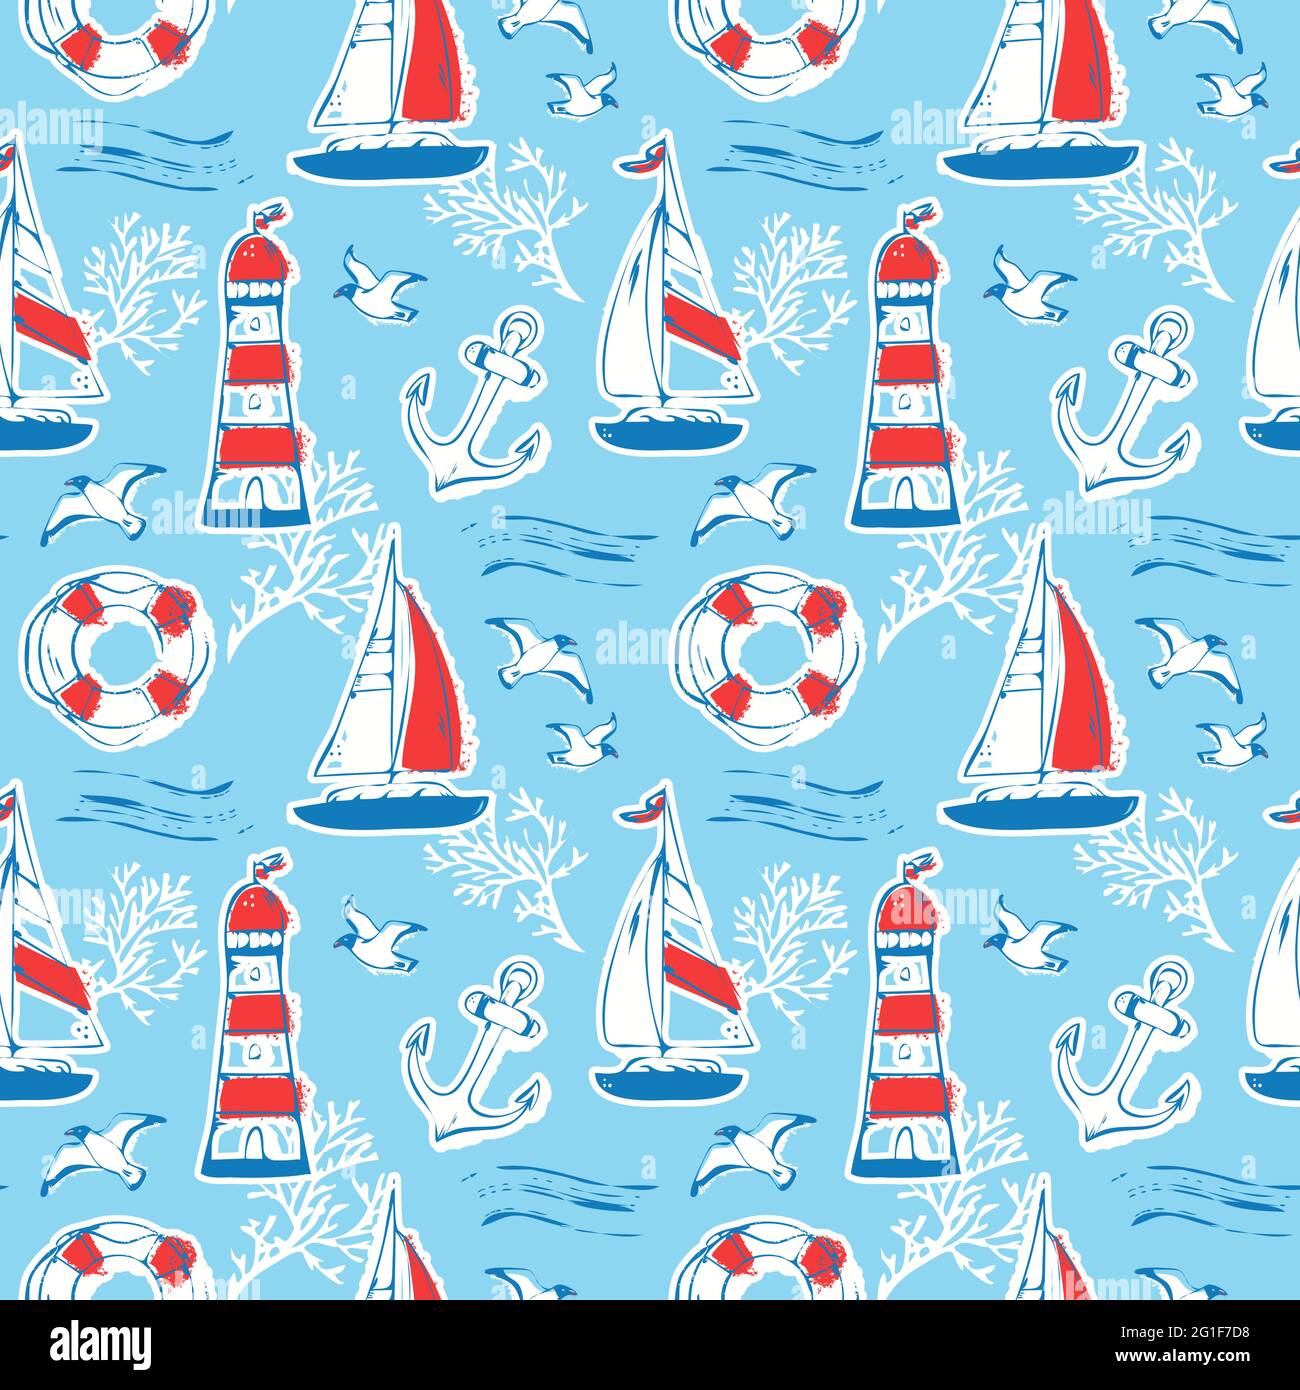 Nautical seamless pattern with sail boat, lighthouse, seagull, anchor and other marine symbols. Sea travel theme. Vector background. Stock Vector